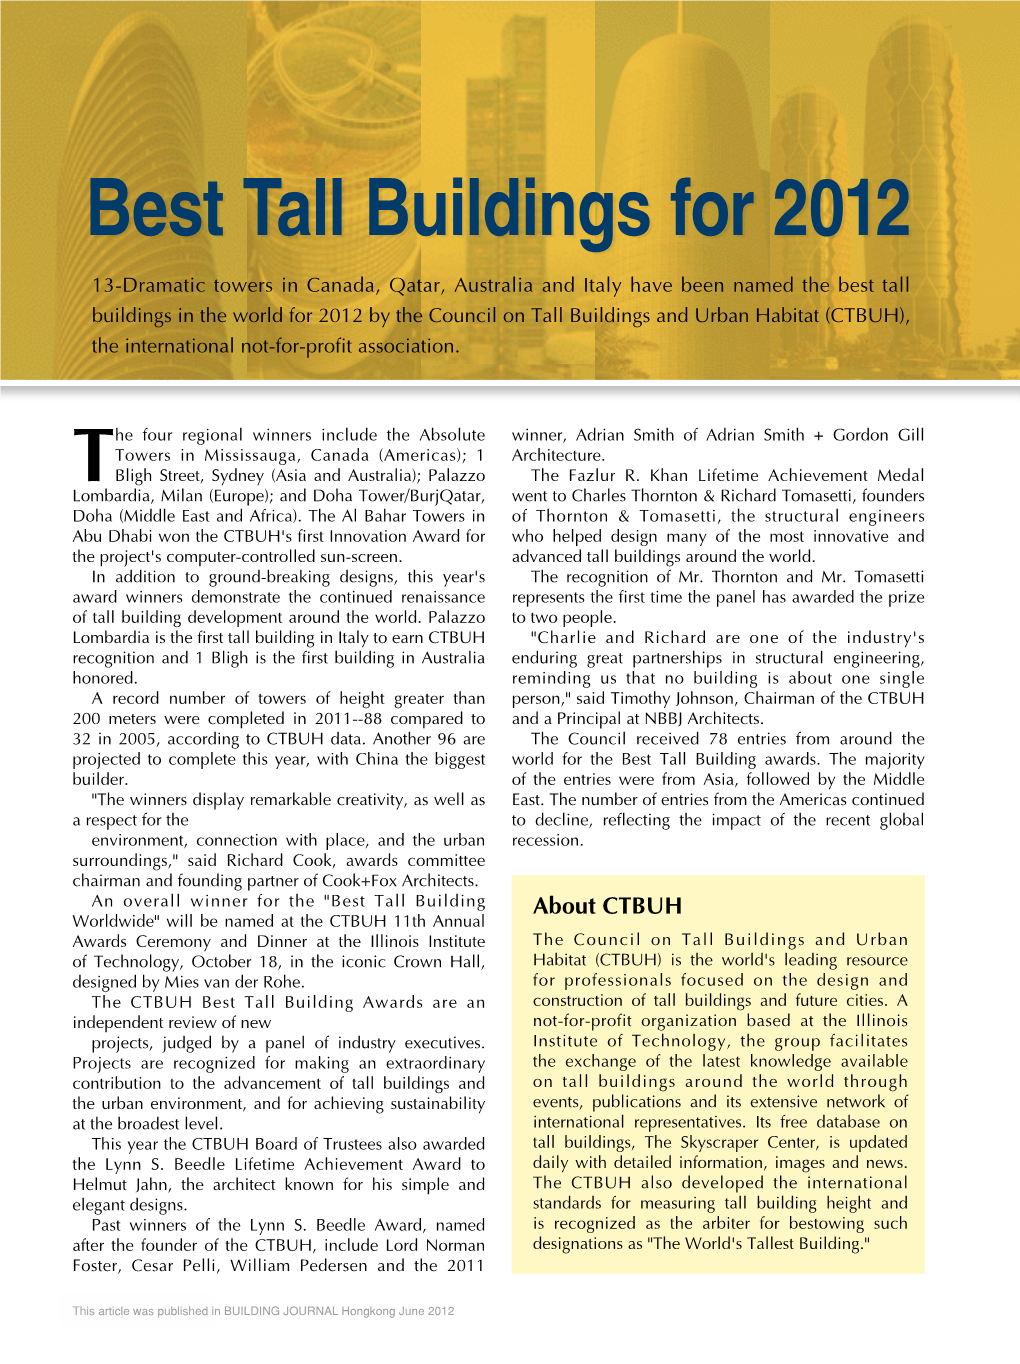 Best Tall Buildings for 2012